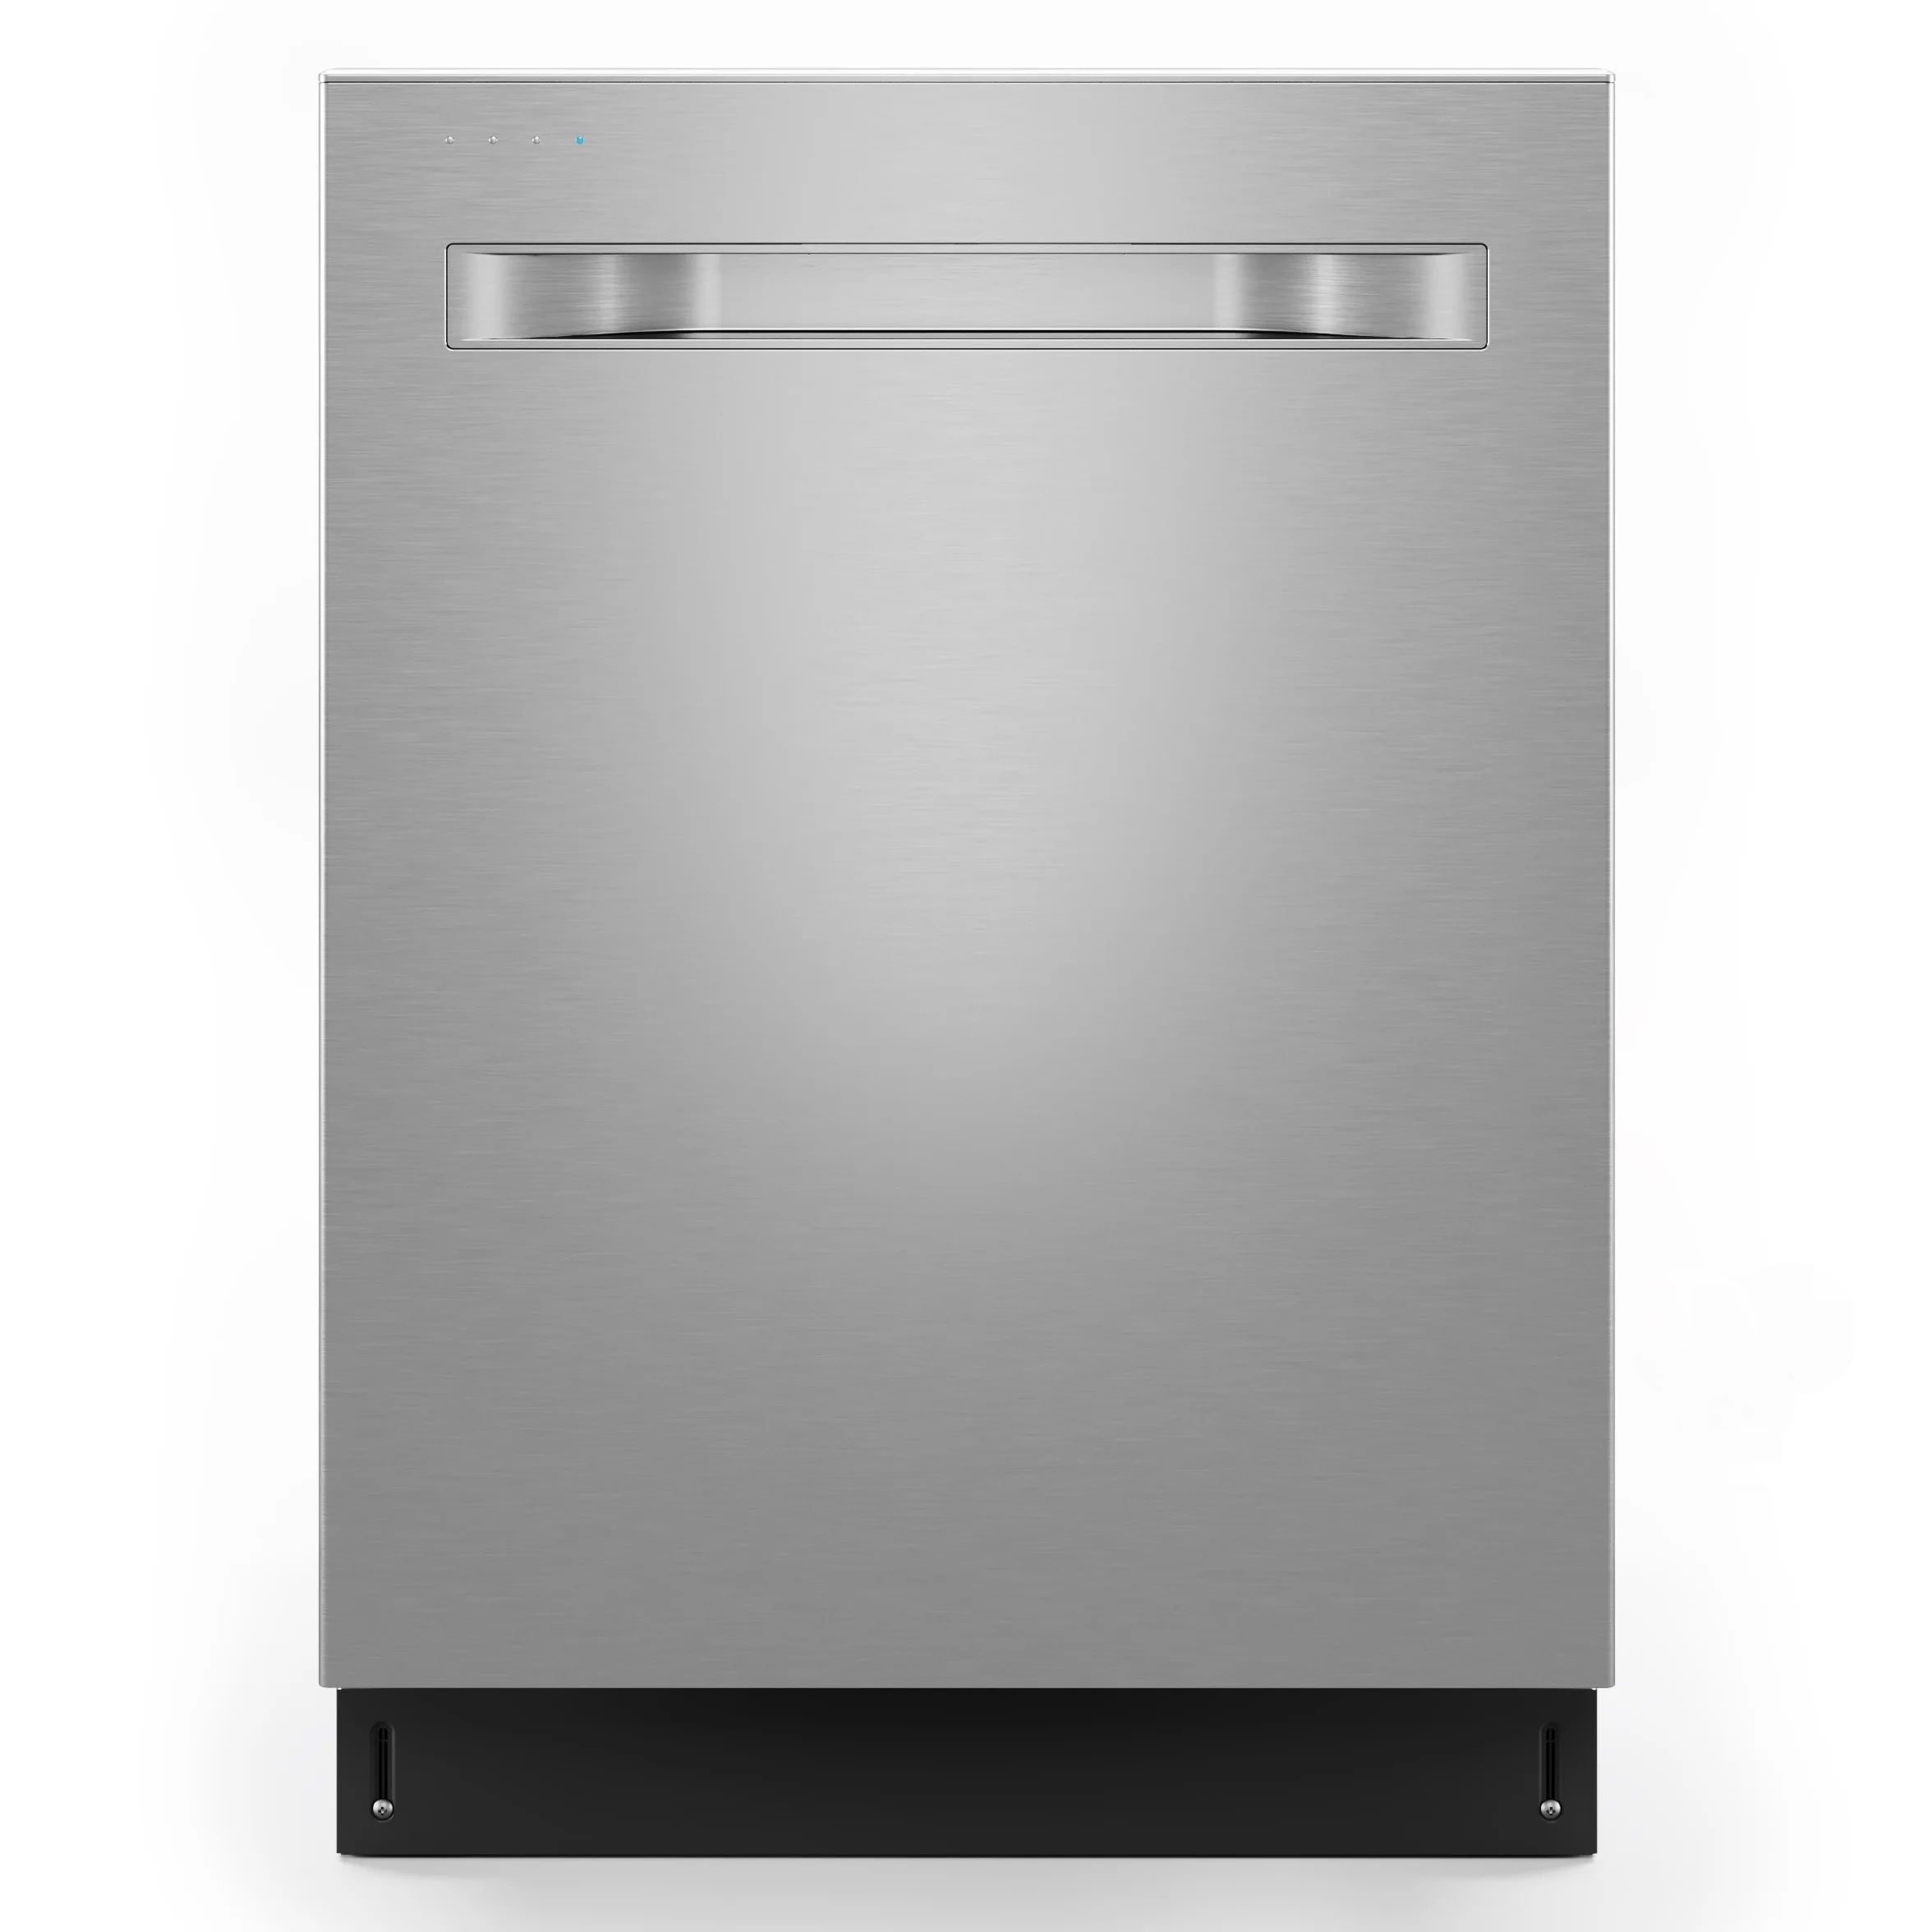 4th of July sale: Get discounted dishwashers from Best Buy and more